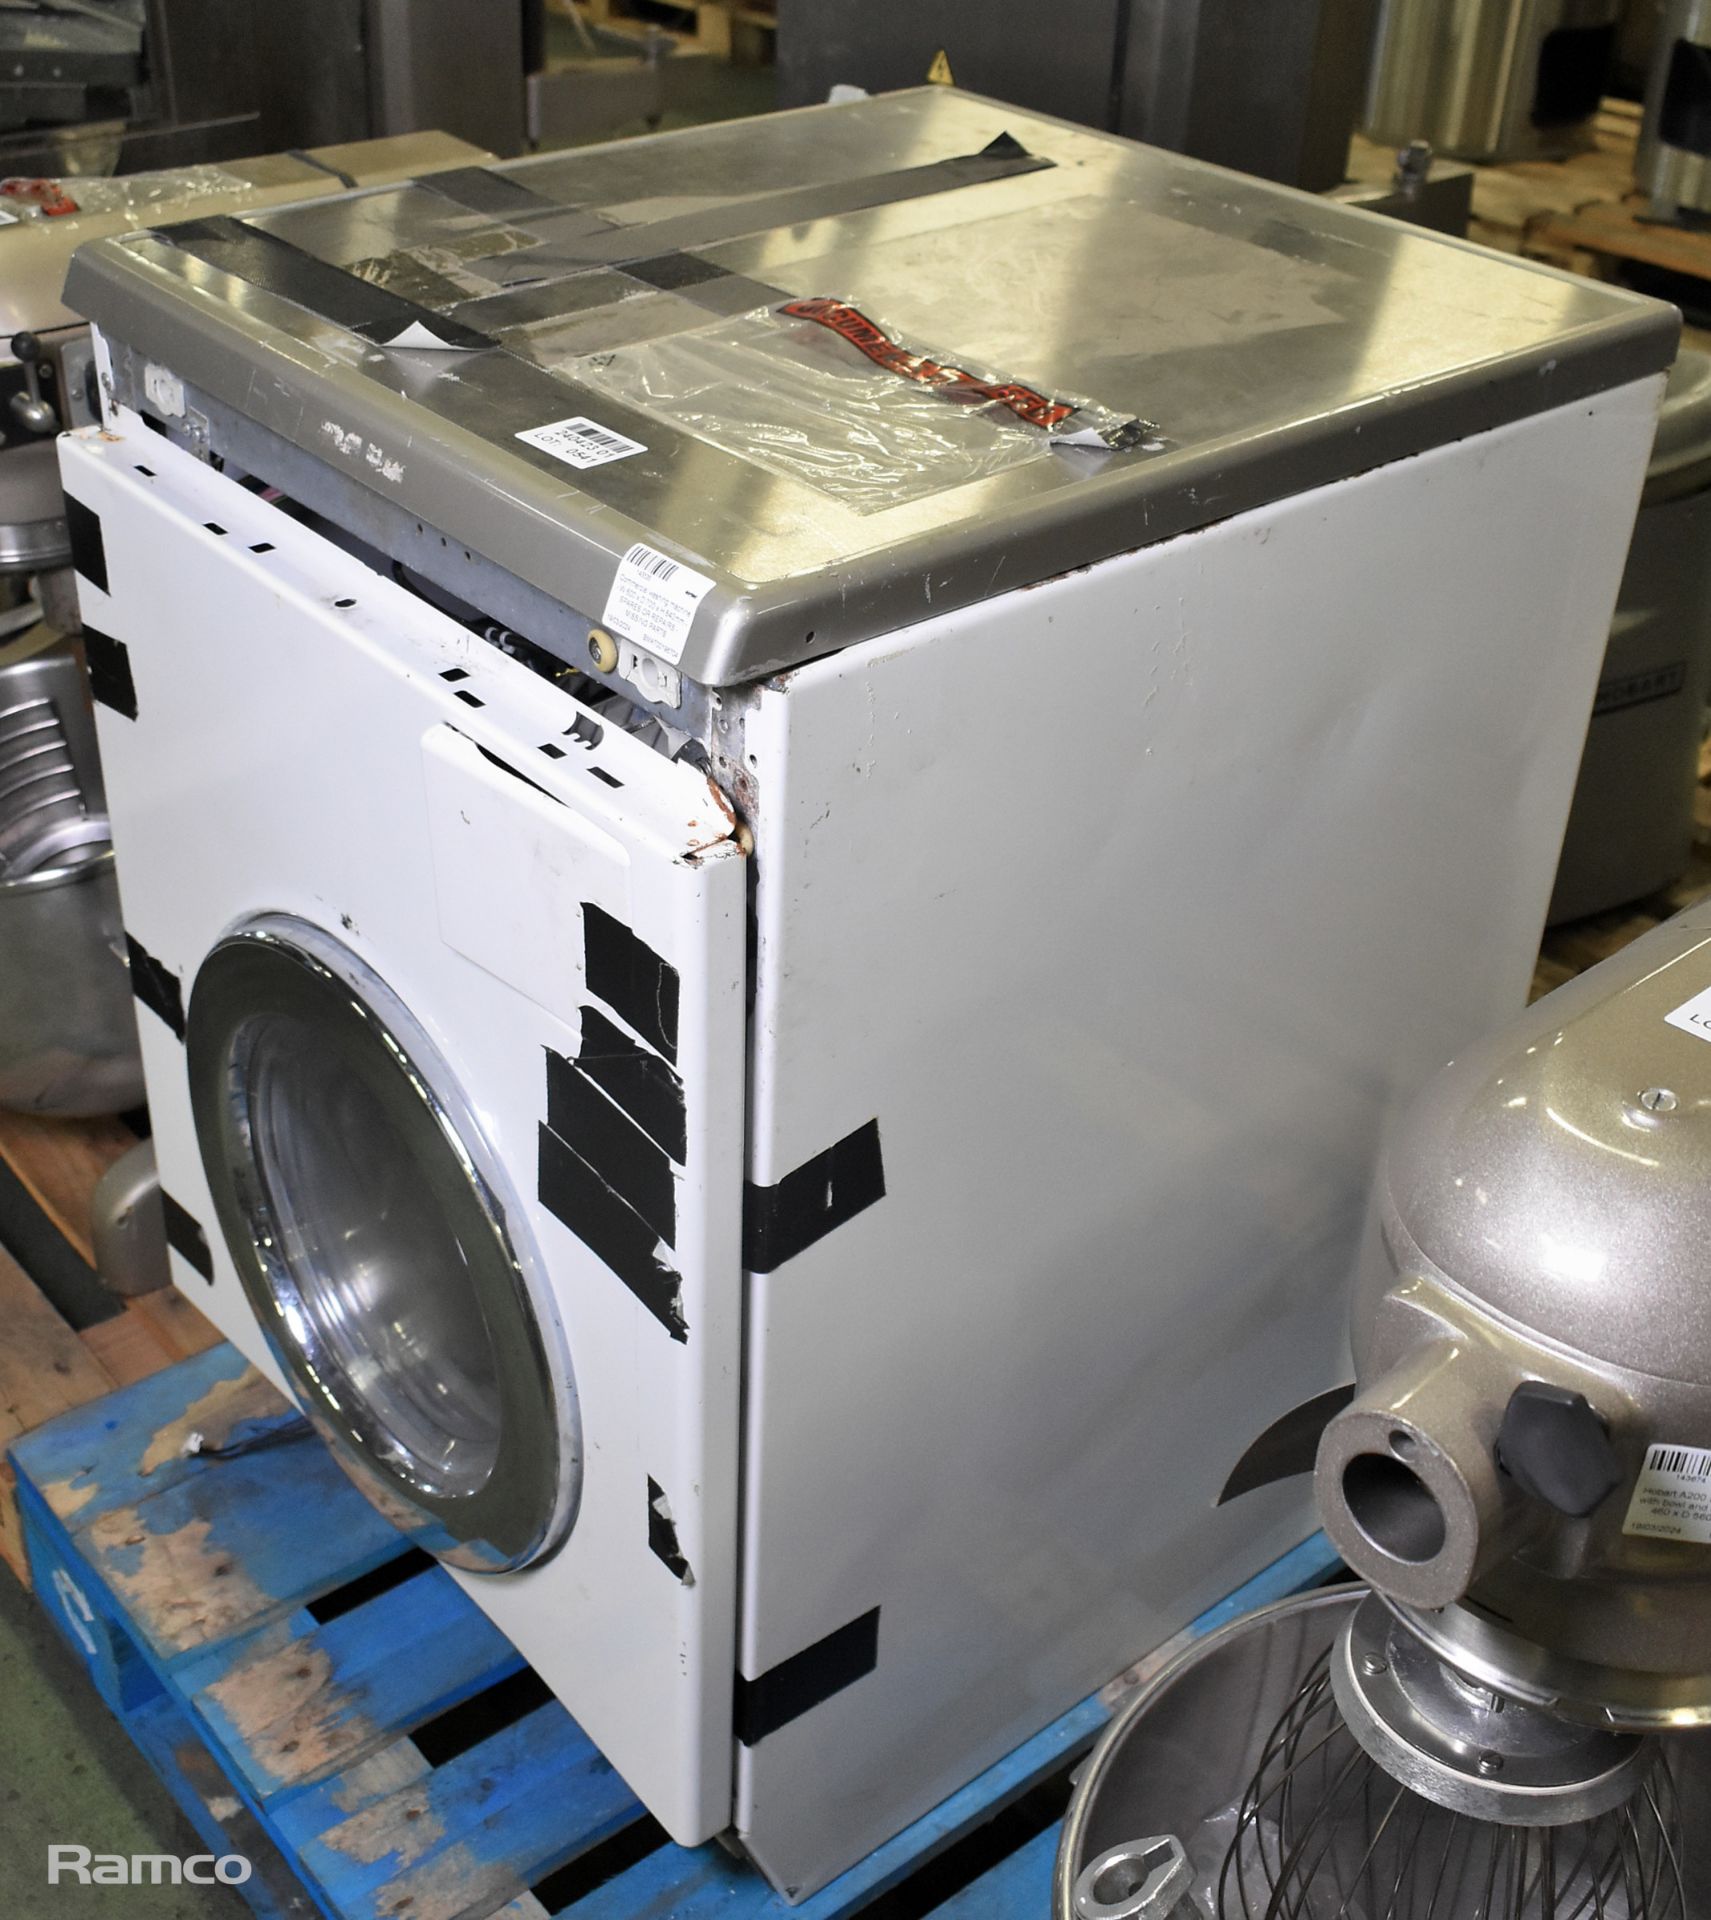 Commercial washing machine - W 600 x D 700 x H 840mm - SPARES OR REPAIRS - MISSING PARTS - Image 4 of 4